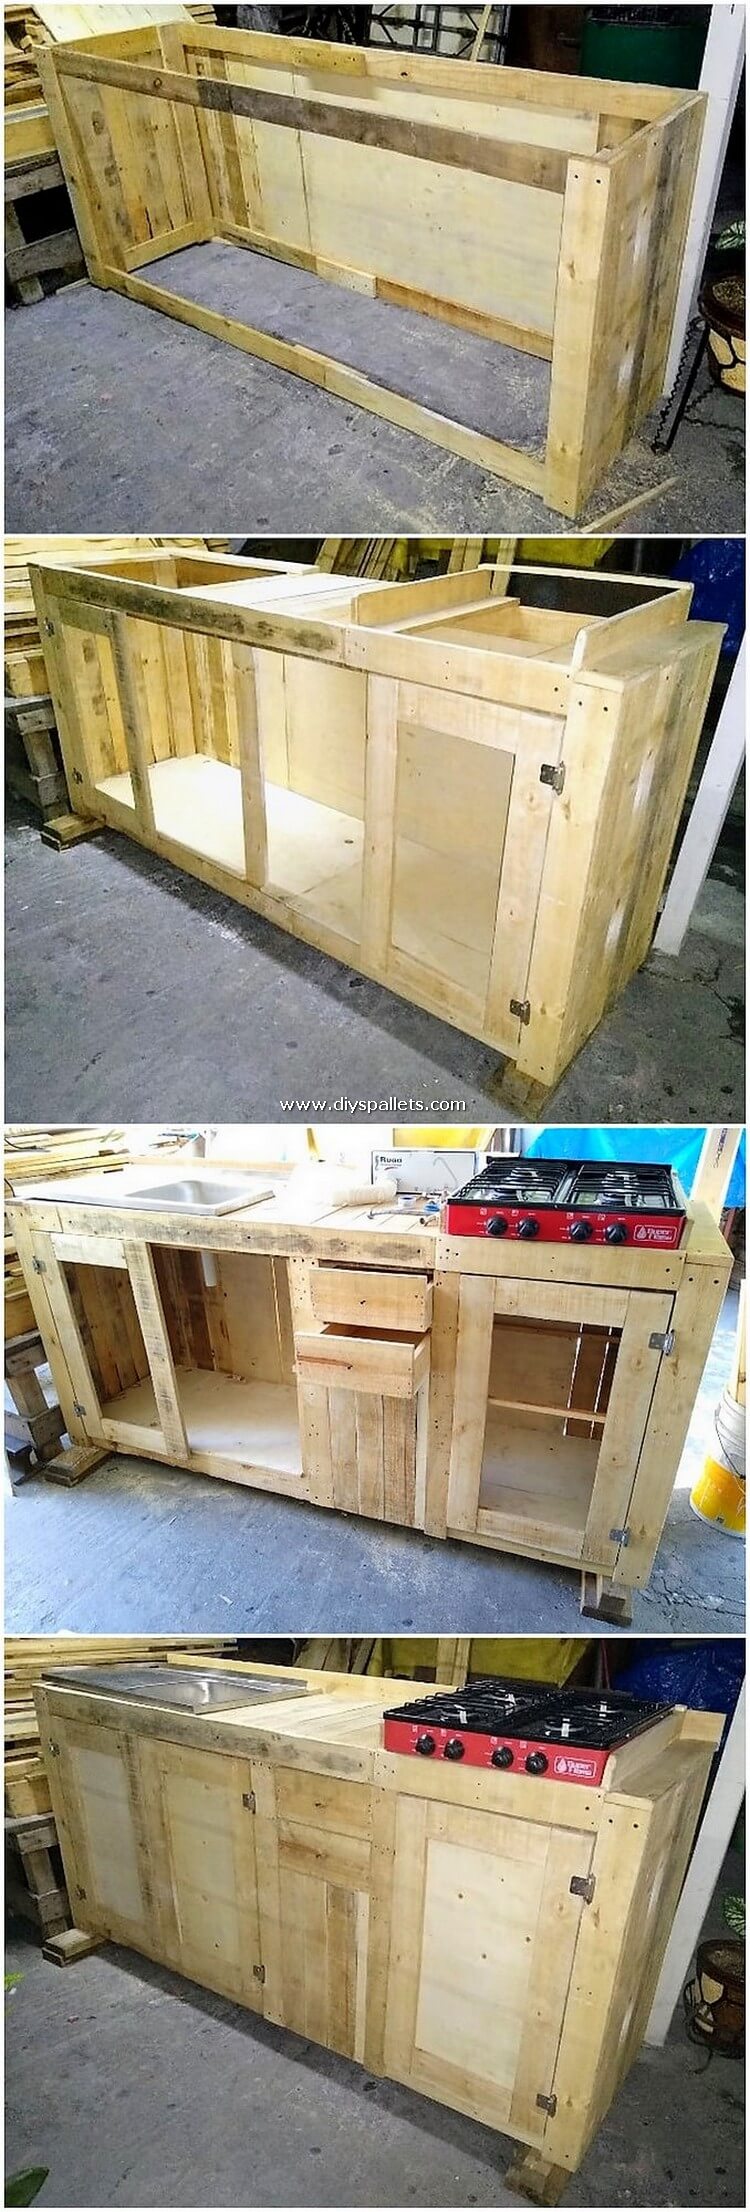 DIY Pallet Kitchen Island Table with Cabinets